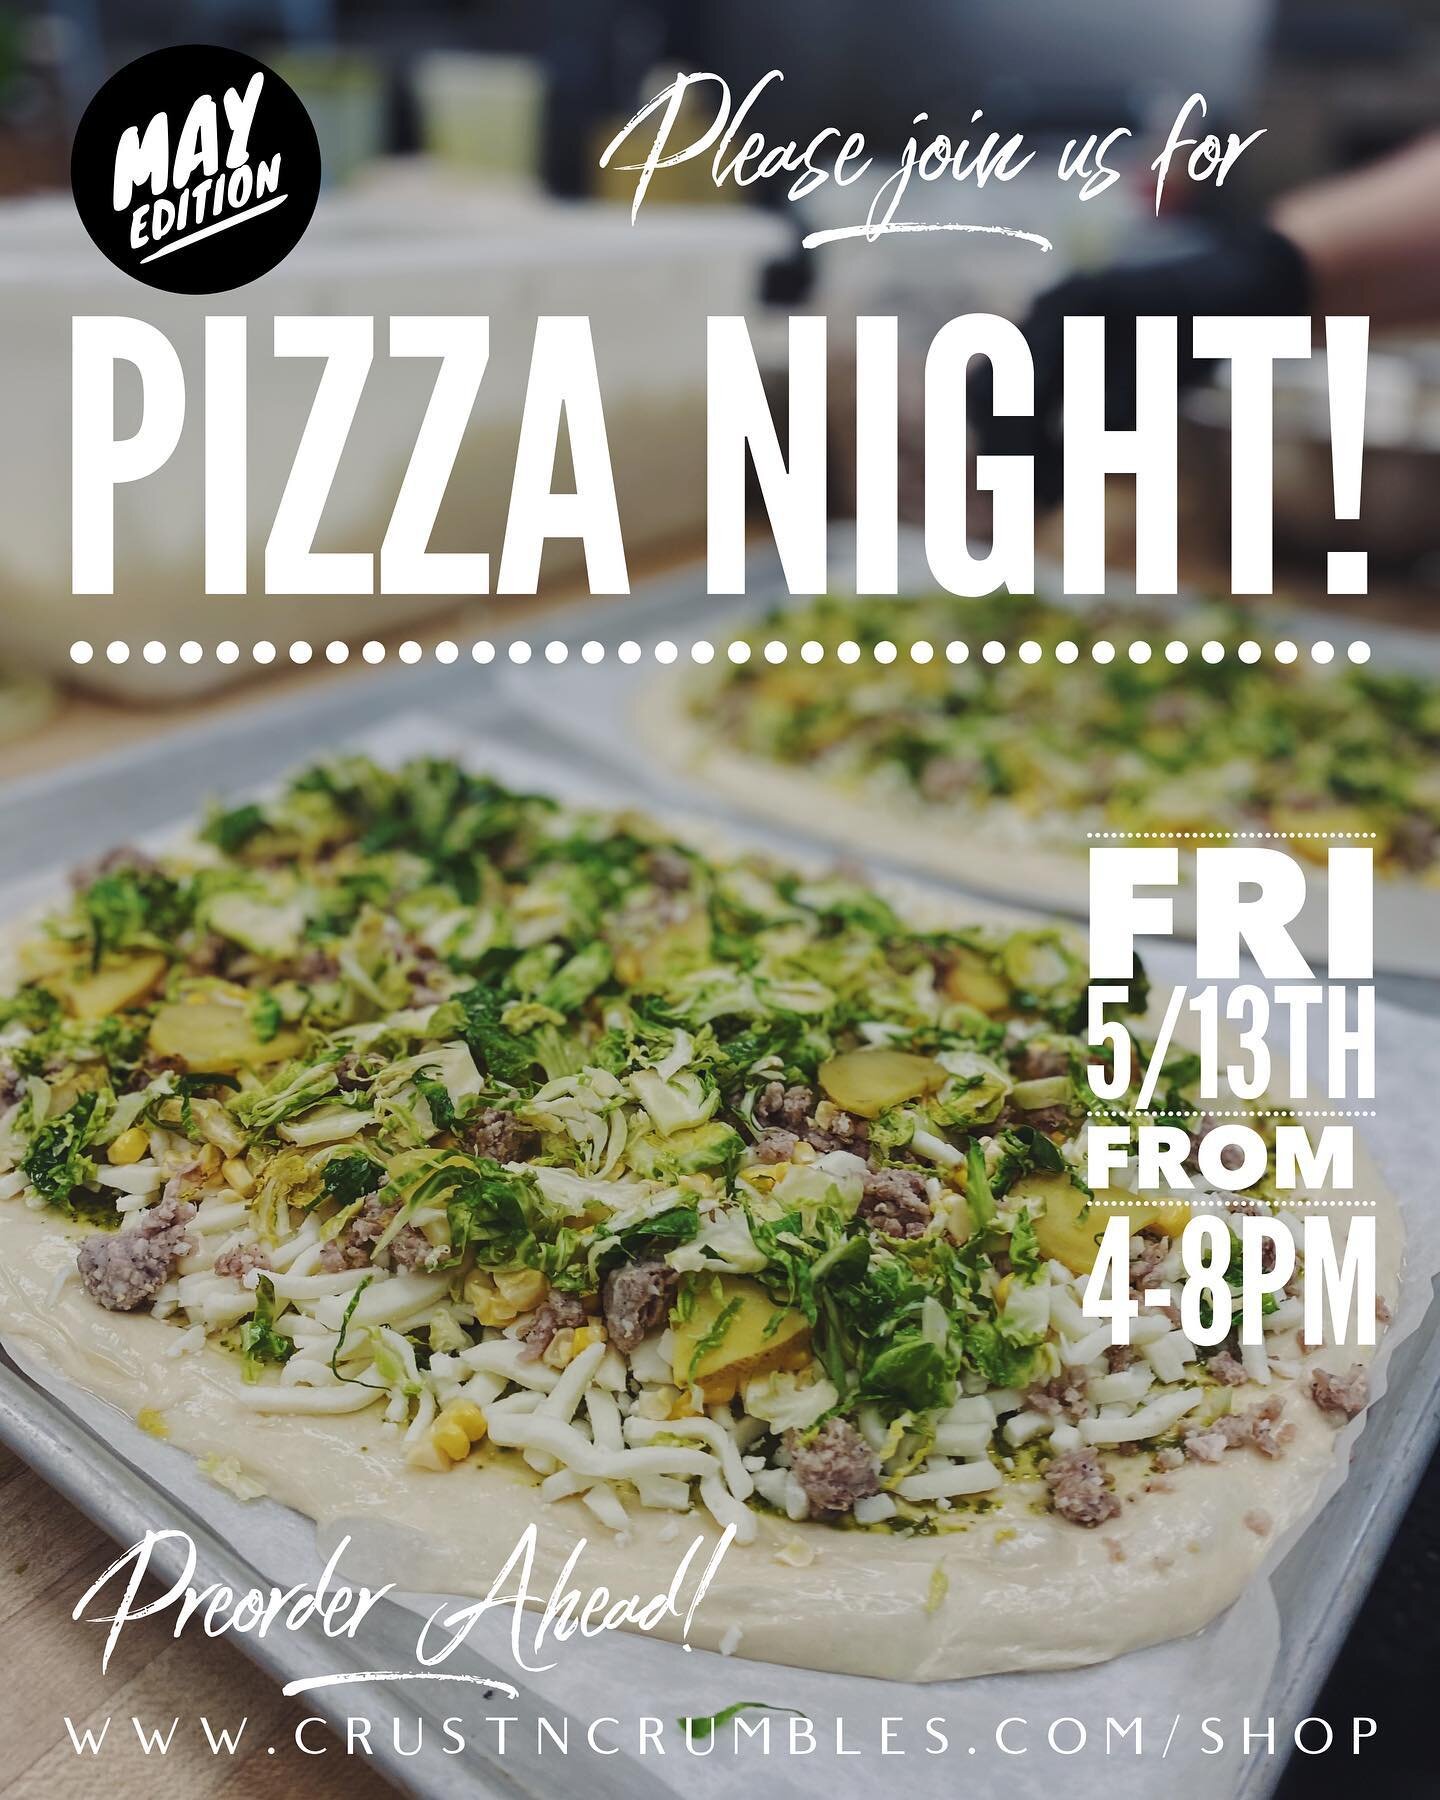 If ya haven&rsquo;t heard yet, we will be taking a little break on our (late Friday) special events for the next 3 months&hellip;so this&rsquo;ll be our last Pizza Night until September! Come join us this coming Friday - the preorder menu is now up o